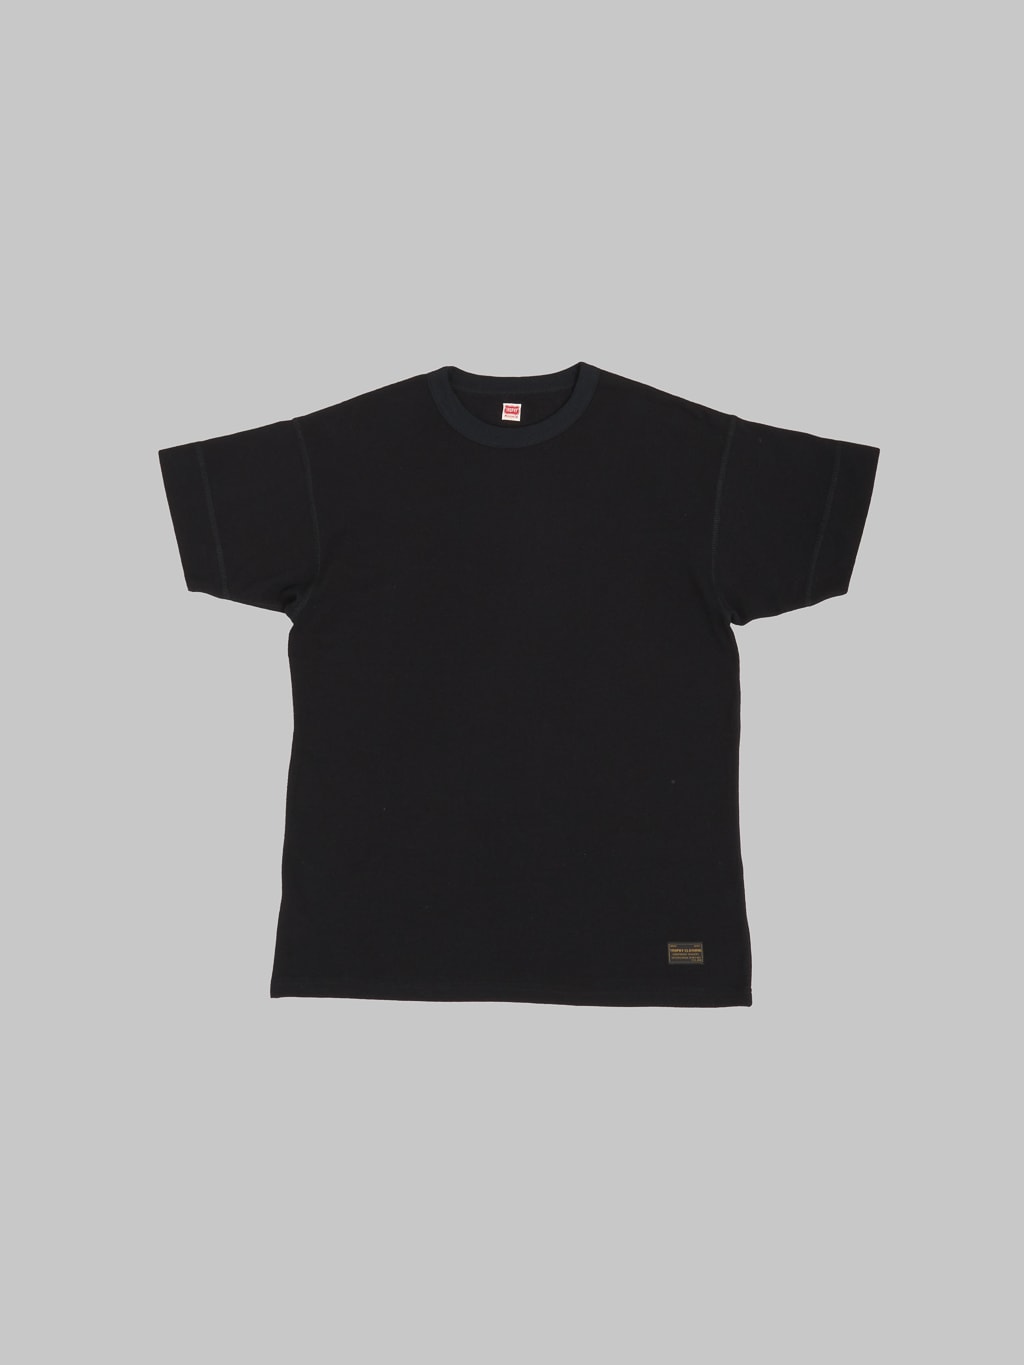 Trophy Clothing Utility Mil Tee black front